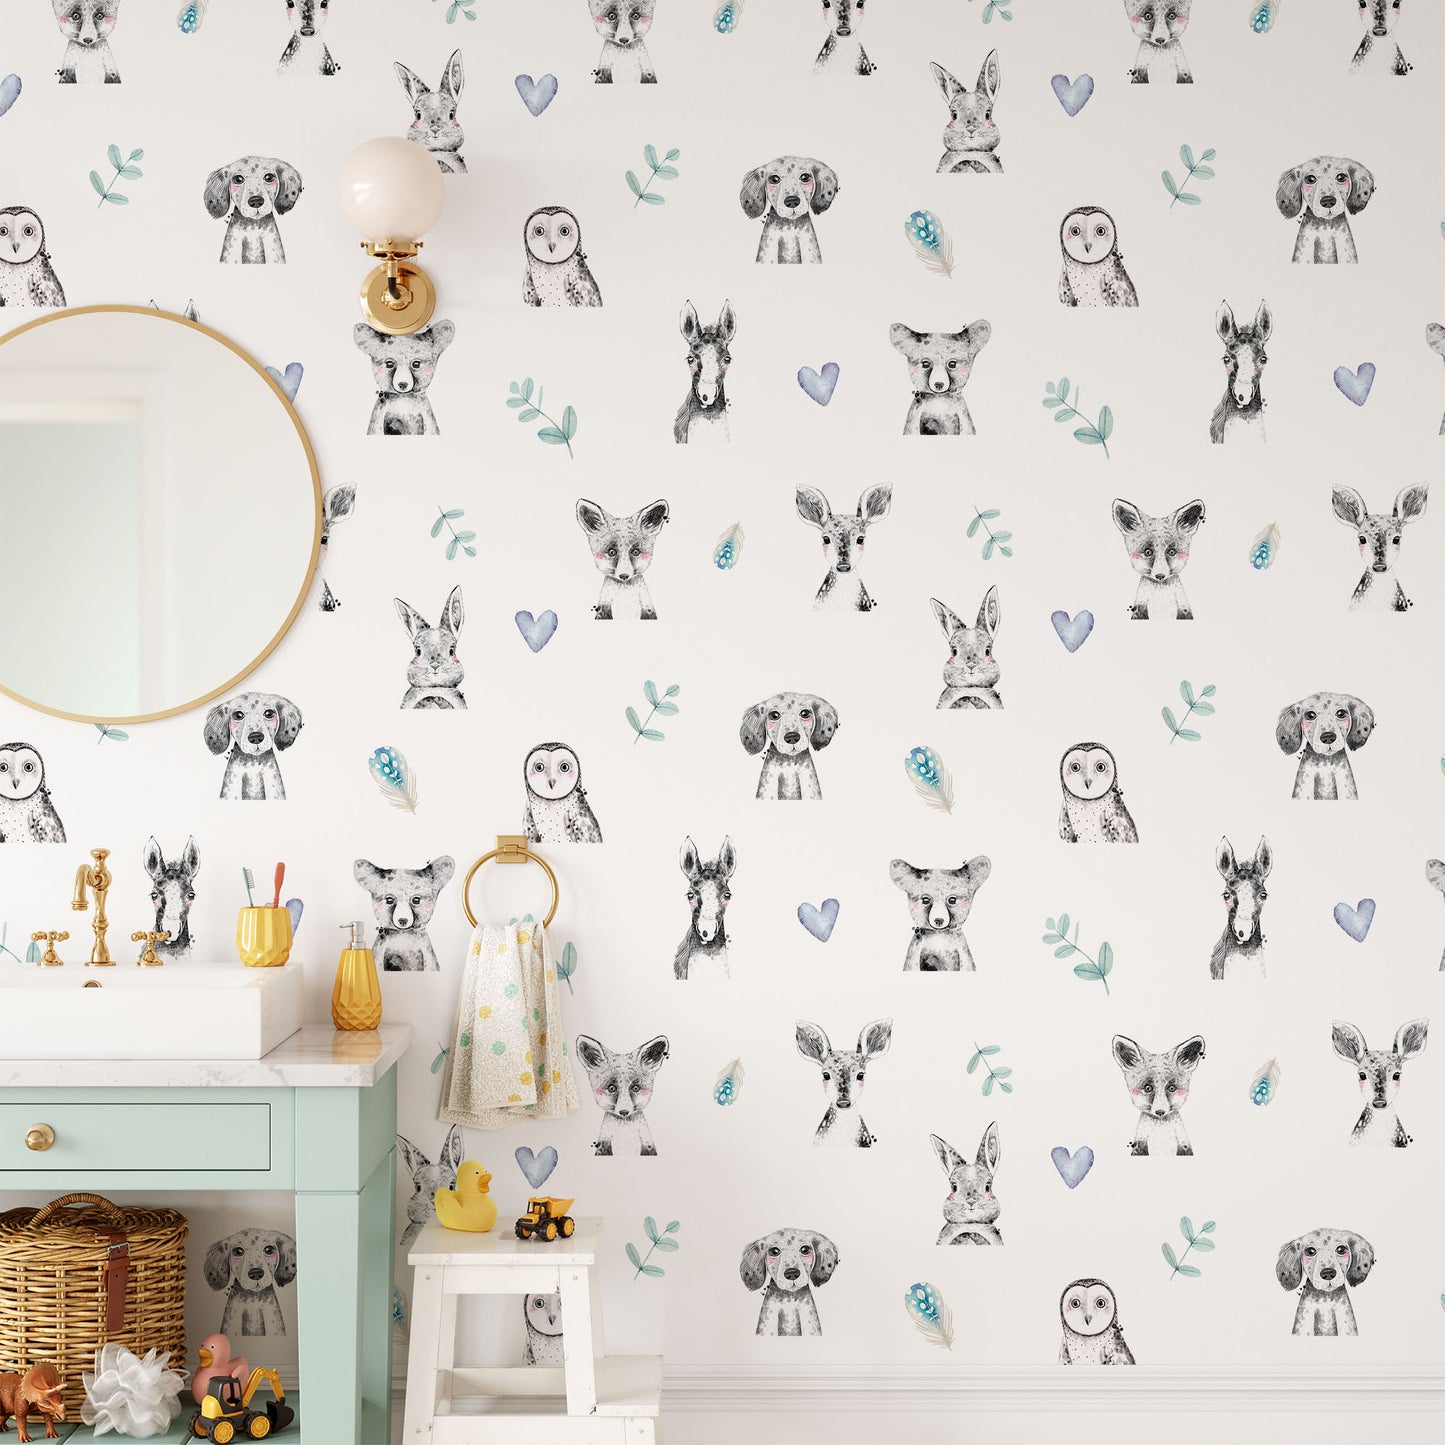 Turquoise friends owl, dog, fox, bunny and horse hand drawn design with turquoise accents on background easy to install and remove peel and stick custom wallpaper available in different lengths/sizes locally created and printed in Canada wallpaper. Washable, durable, commercial grade, removable and waterproof.